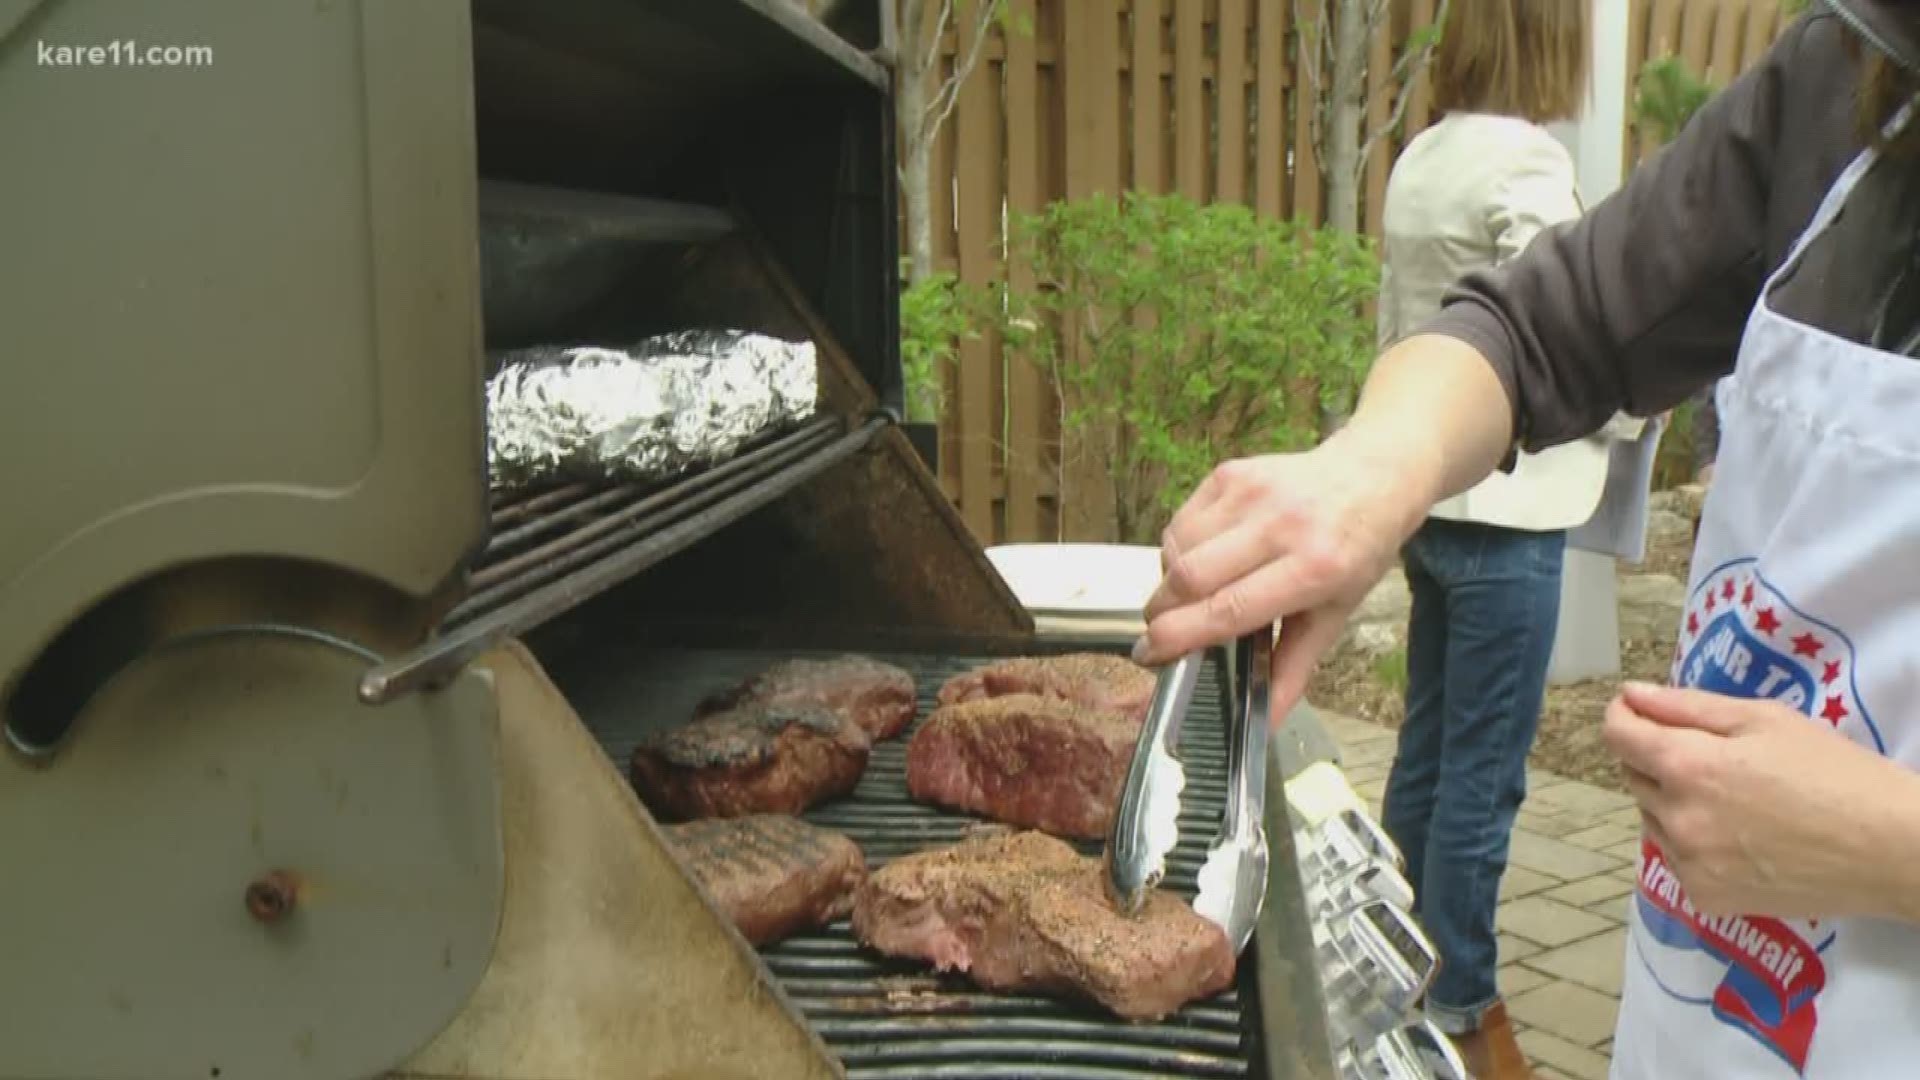 The families of Minnesota soldiers will enjoy a free steak dinner in conjunction with an overseas meal served to troops deployed in Kuwait. Both events will be linked via a live international video.